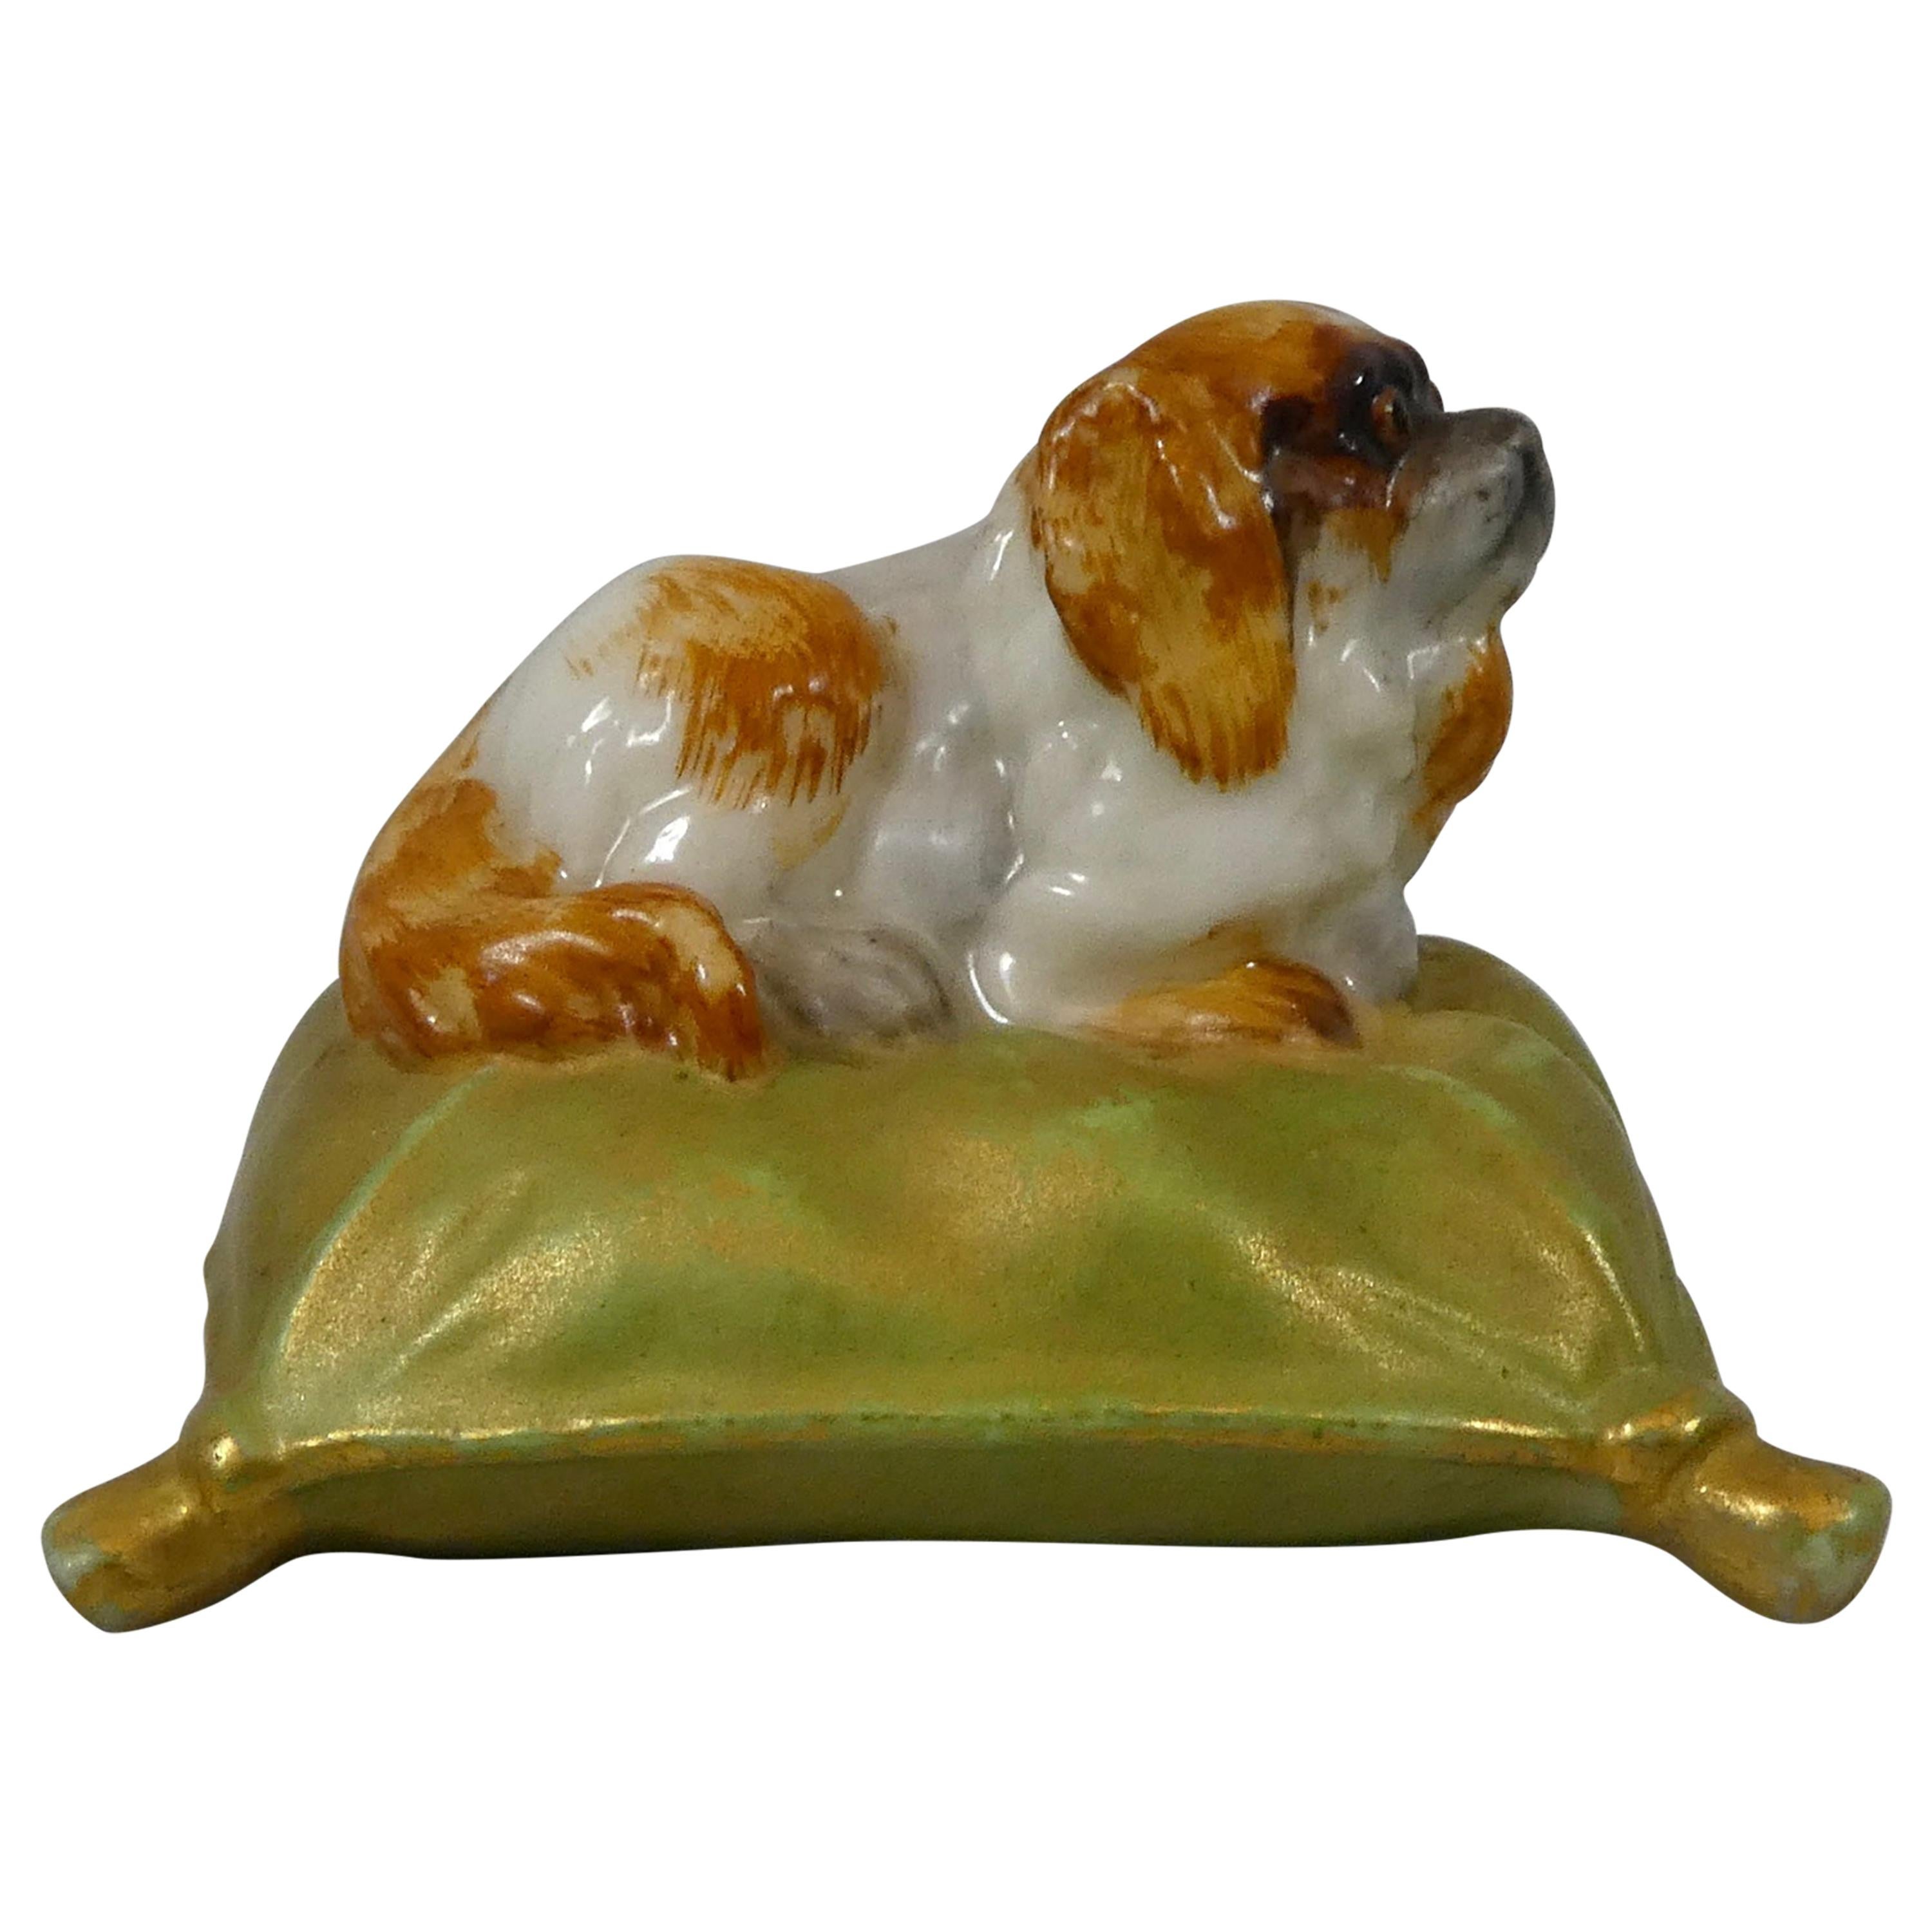 Royal Worcester King Charles Spaniel on a Cushion, Dated 1901